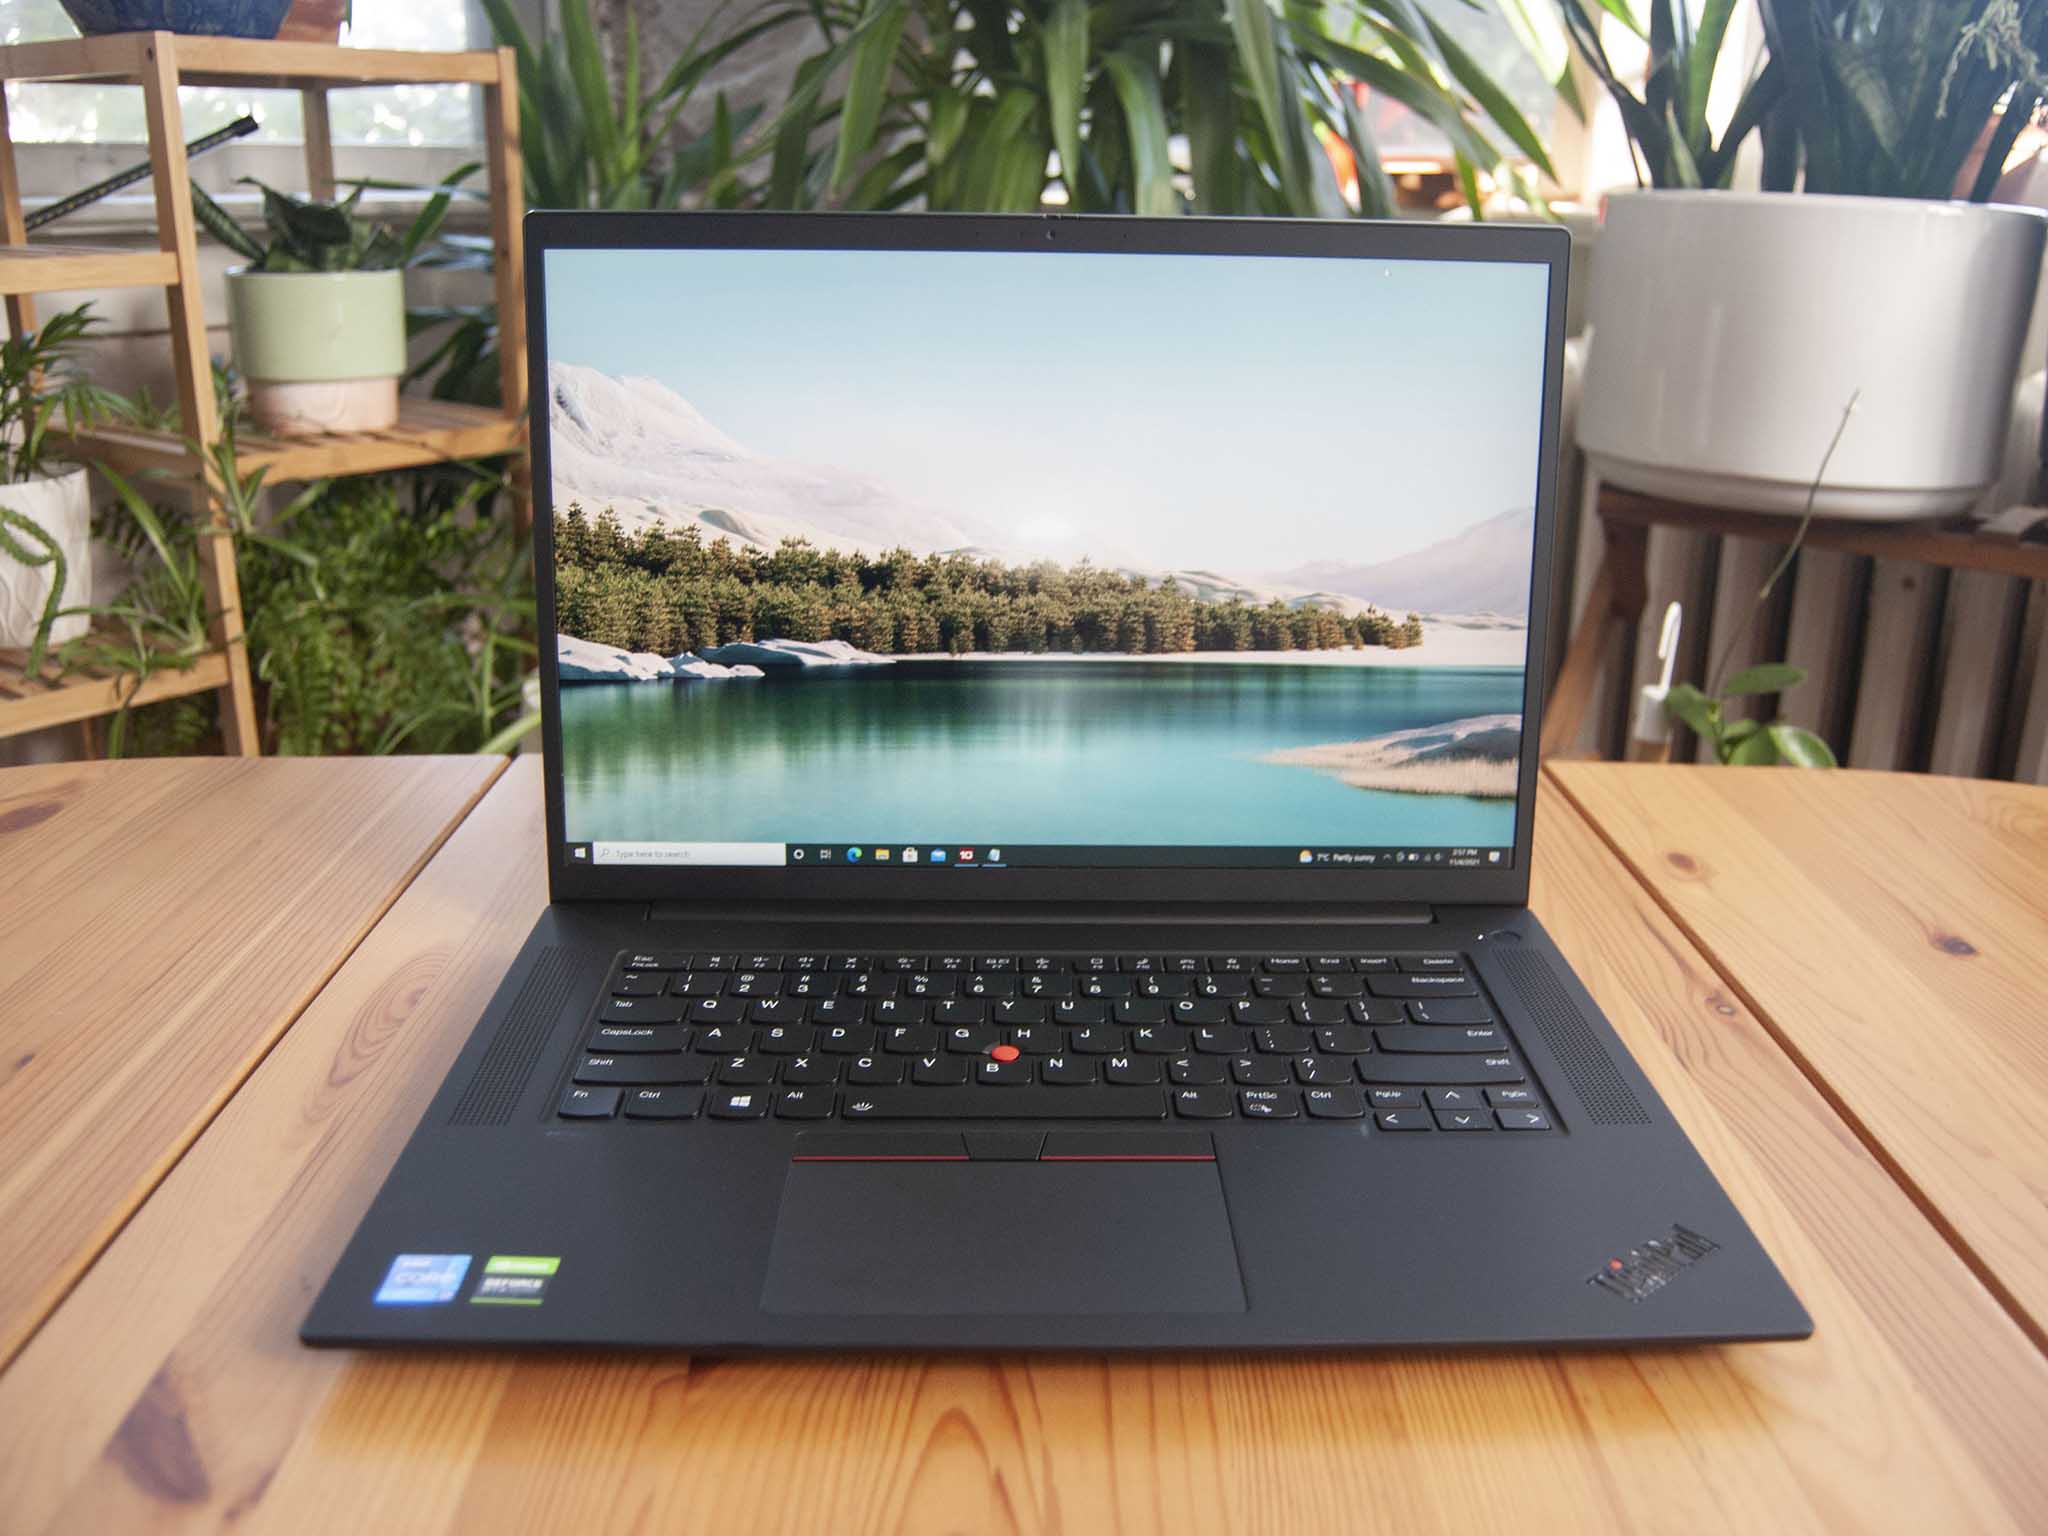 Lenovo ThinkPad X1 Extreme (Gen 4) review: An update that improves 